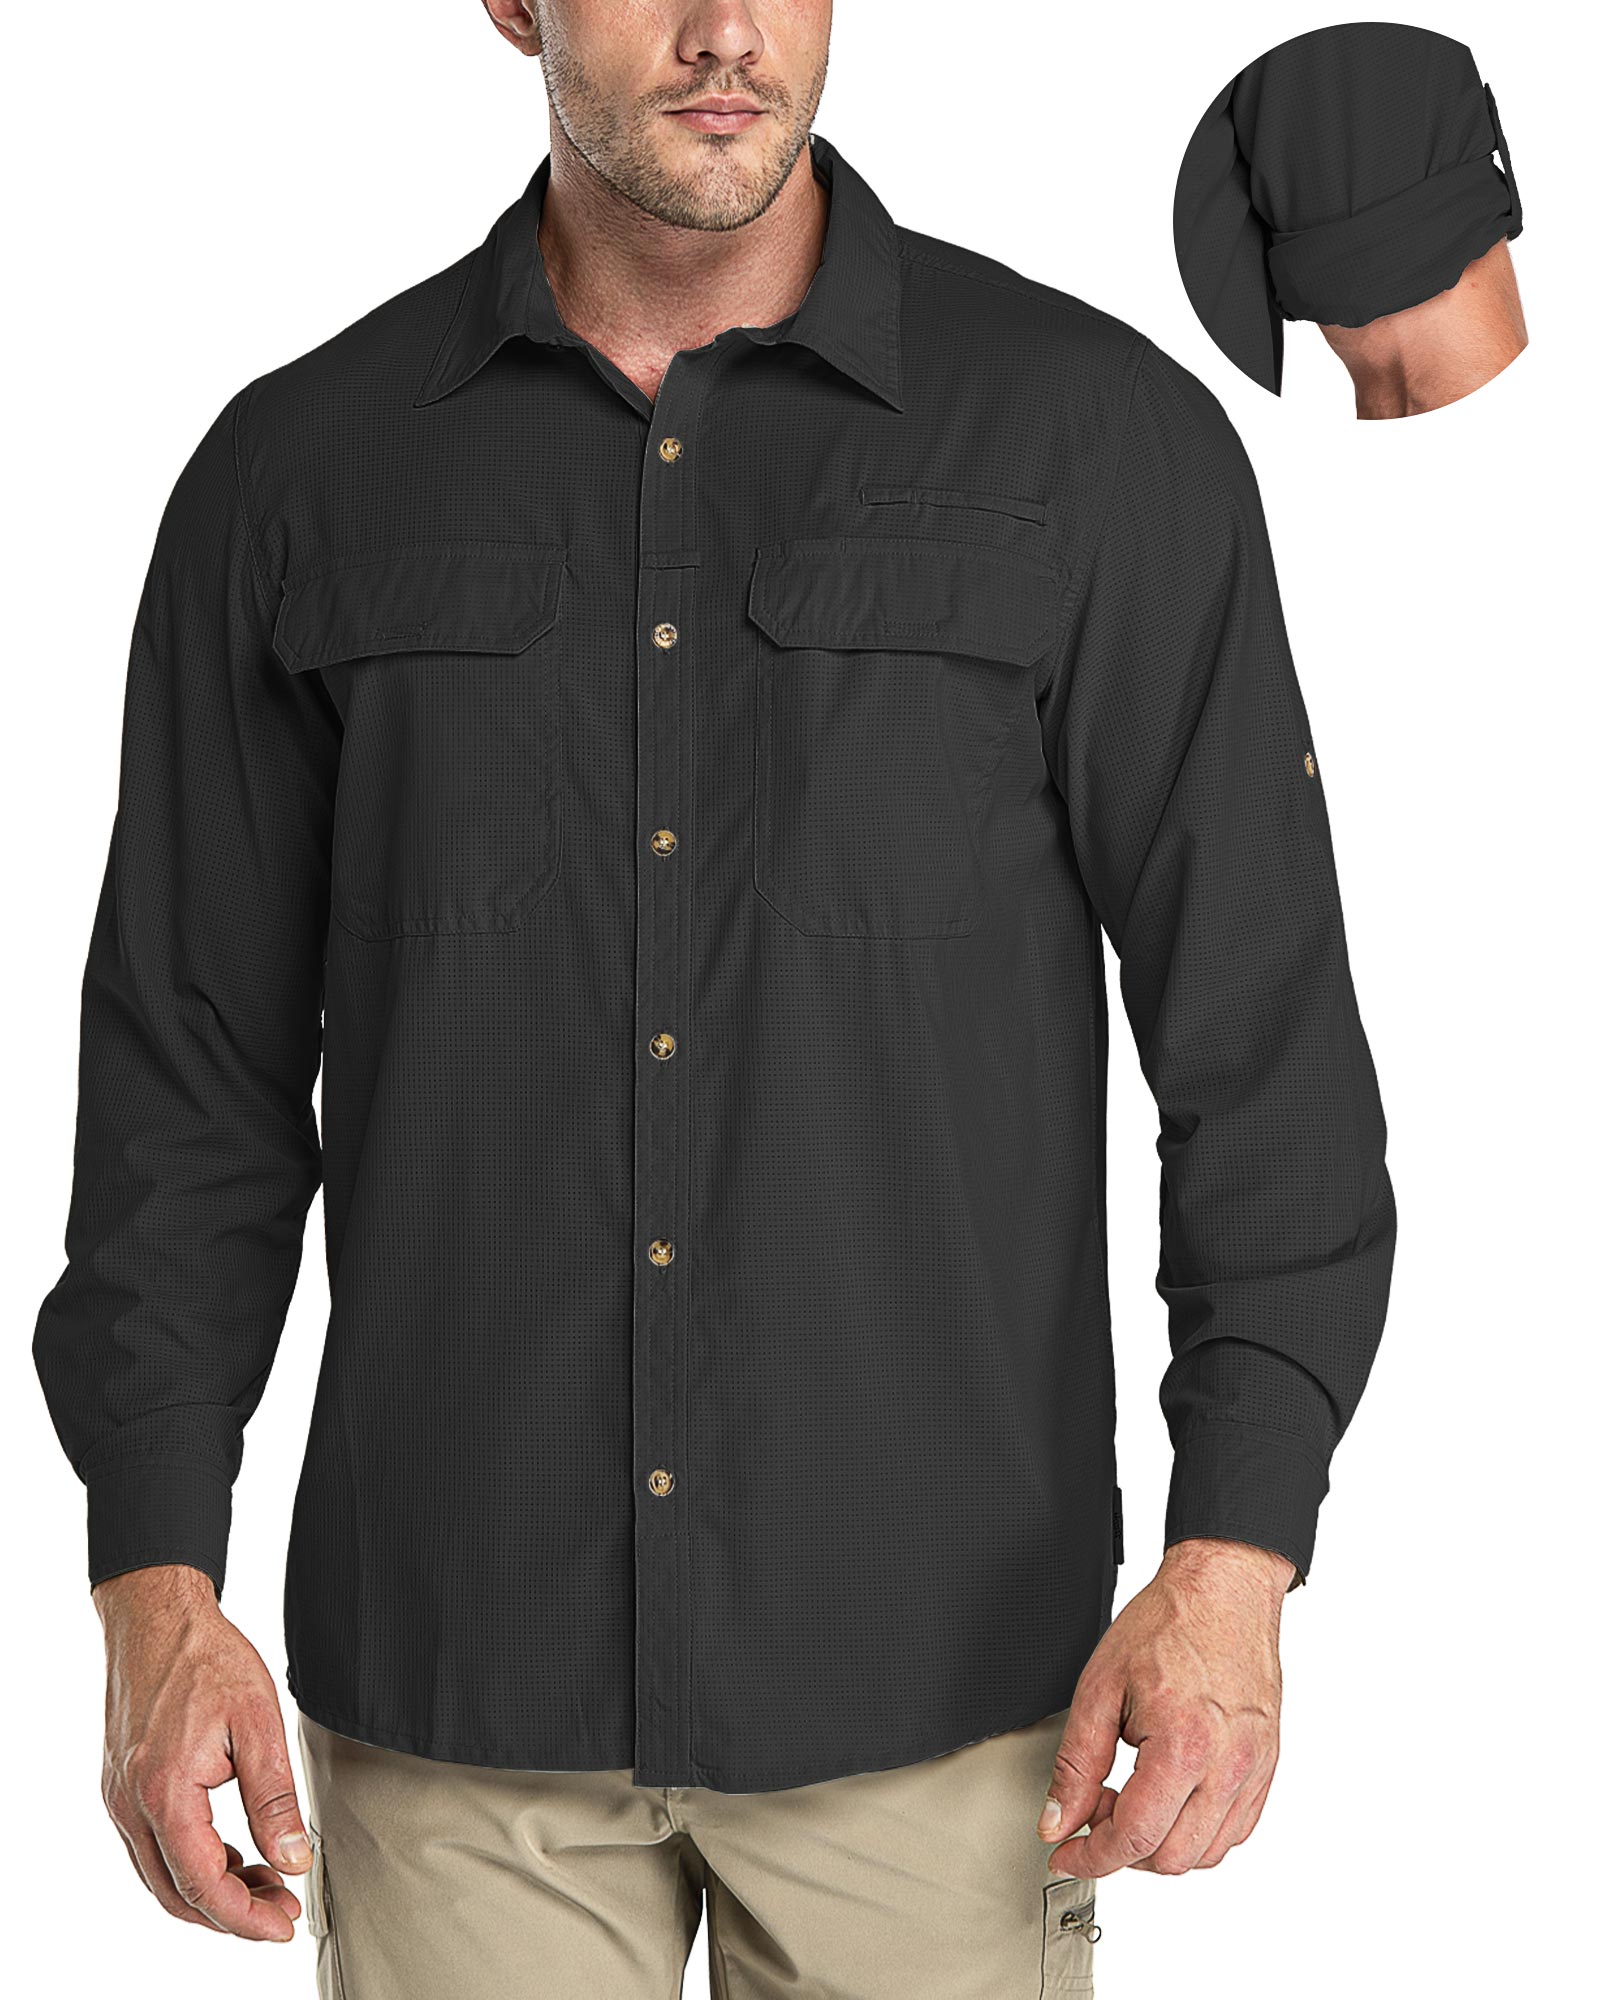 Men's Long Sleeve UPF 50+ GEO® Air-Hole Dry Cooling Shirts with